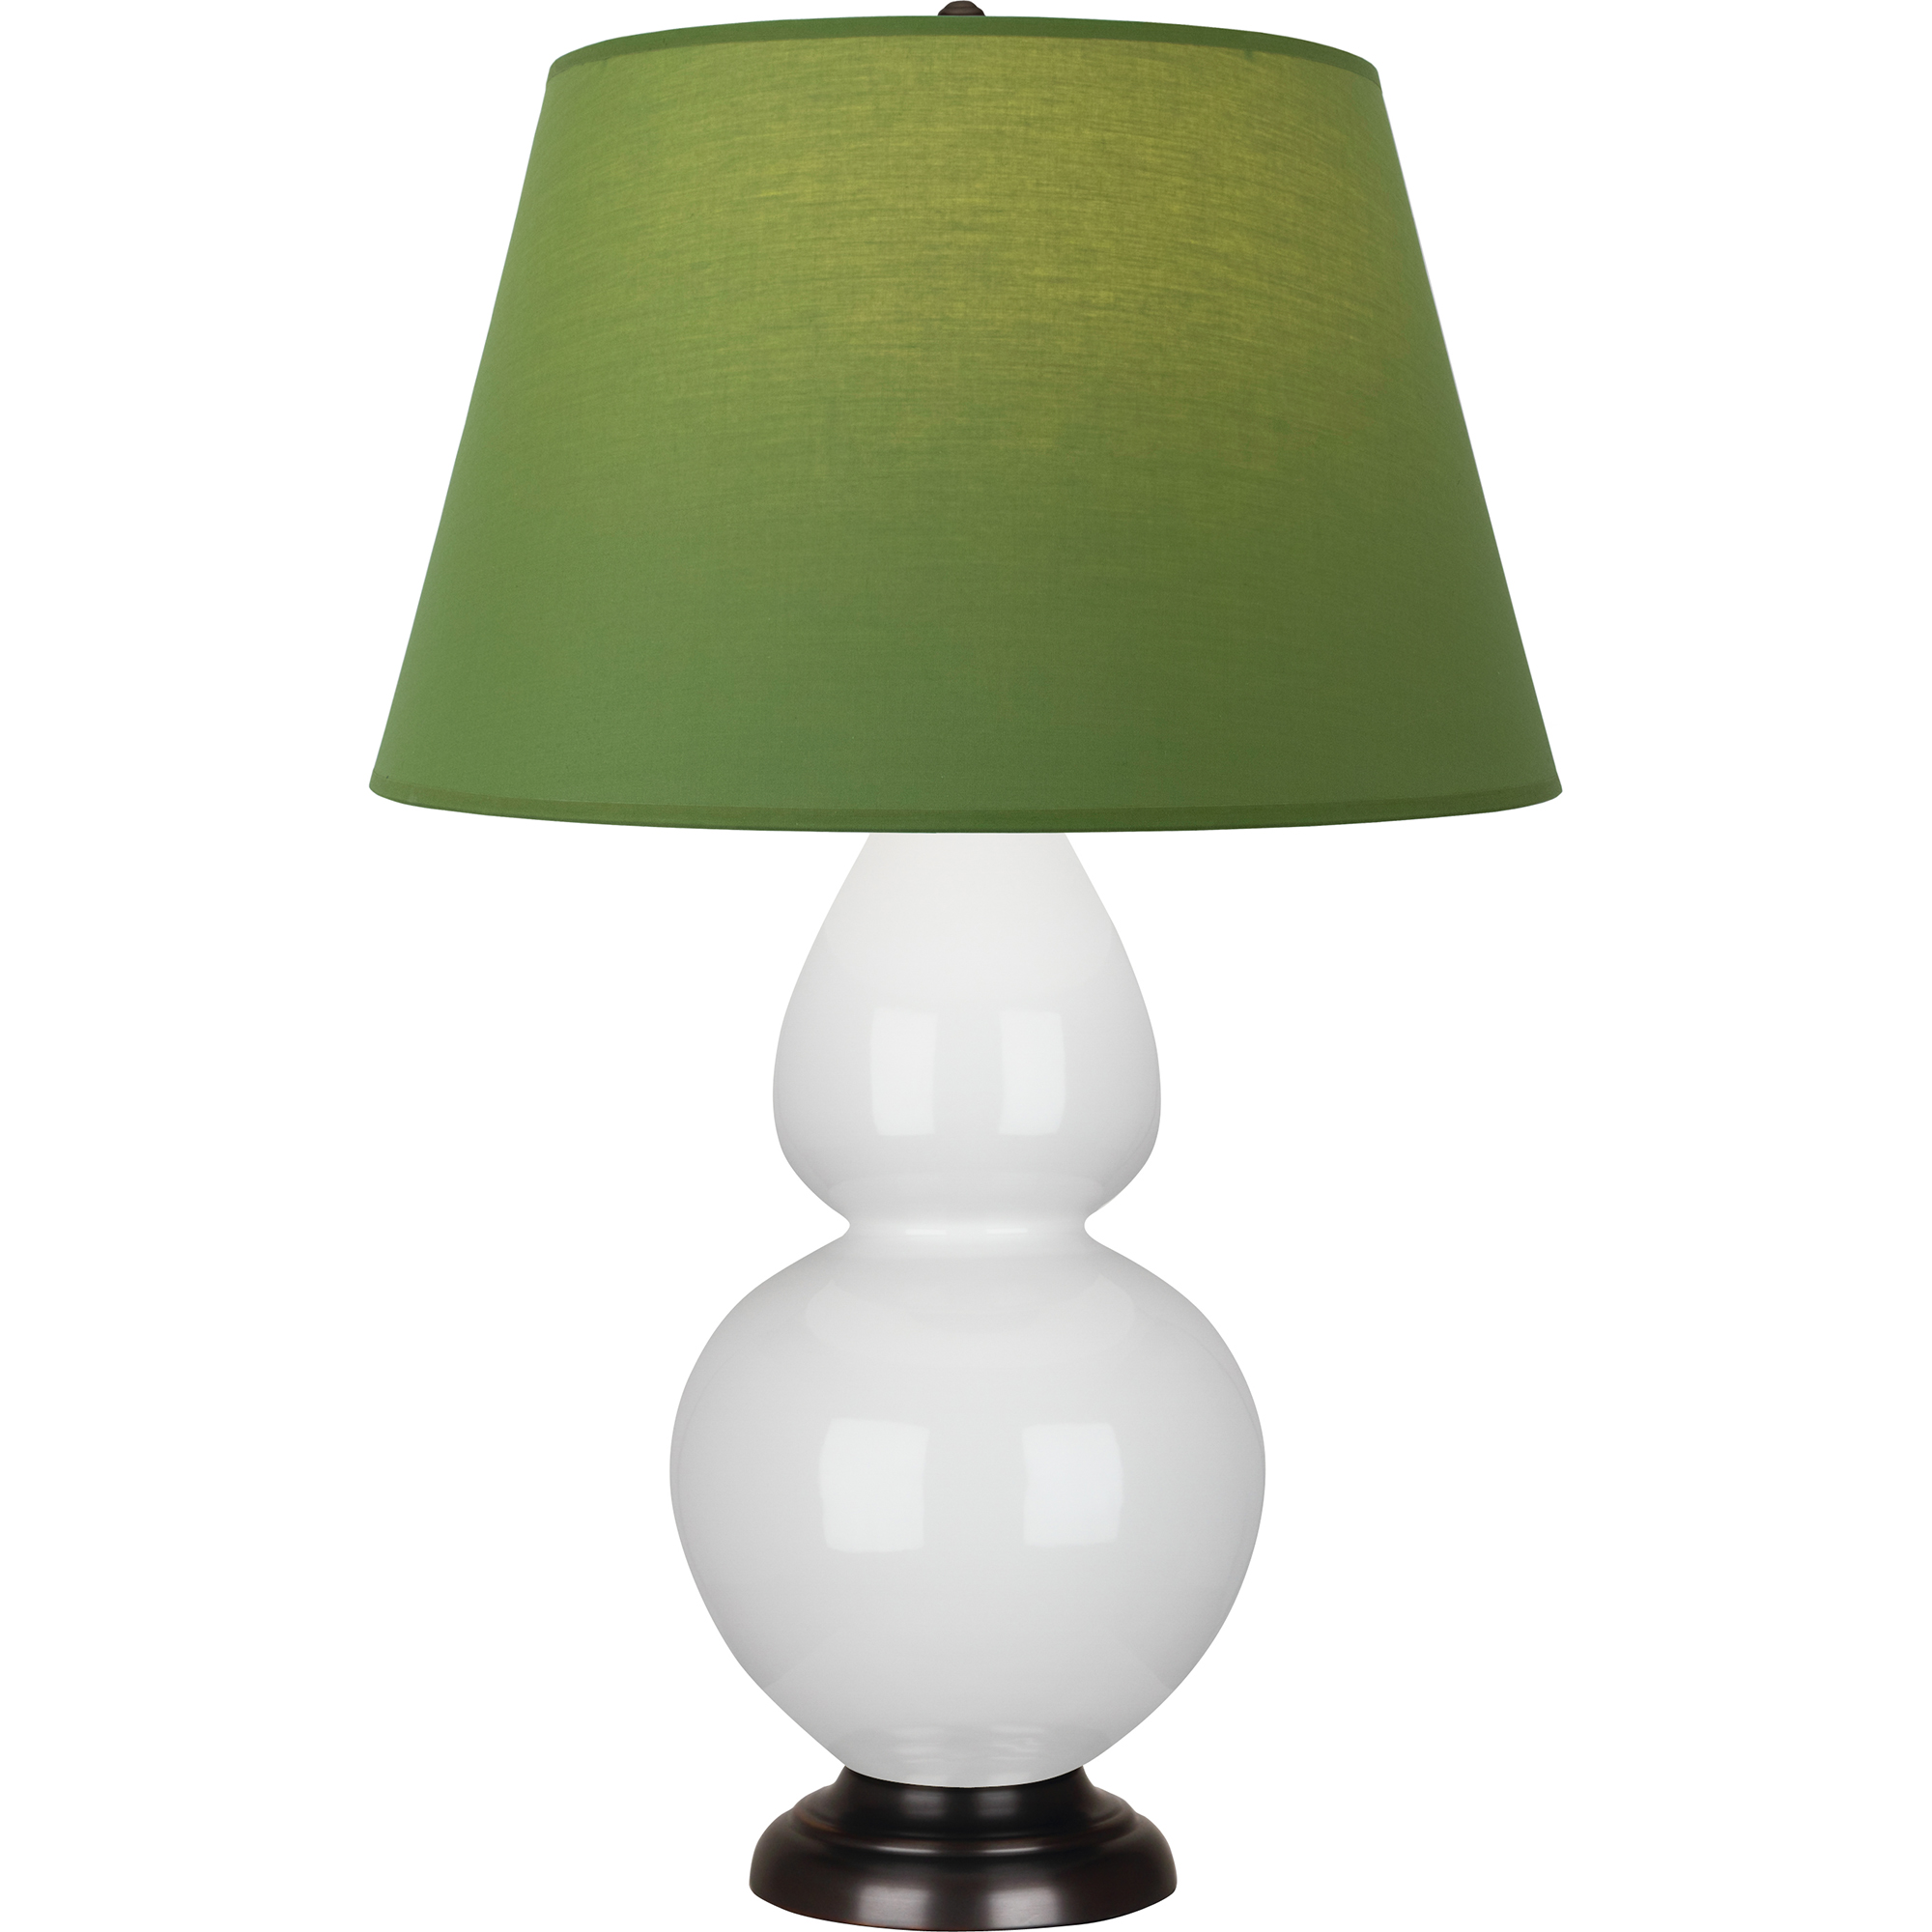 Double Gourd Table Lamp Style #1640G